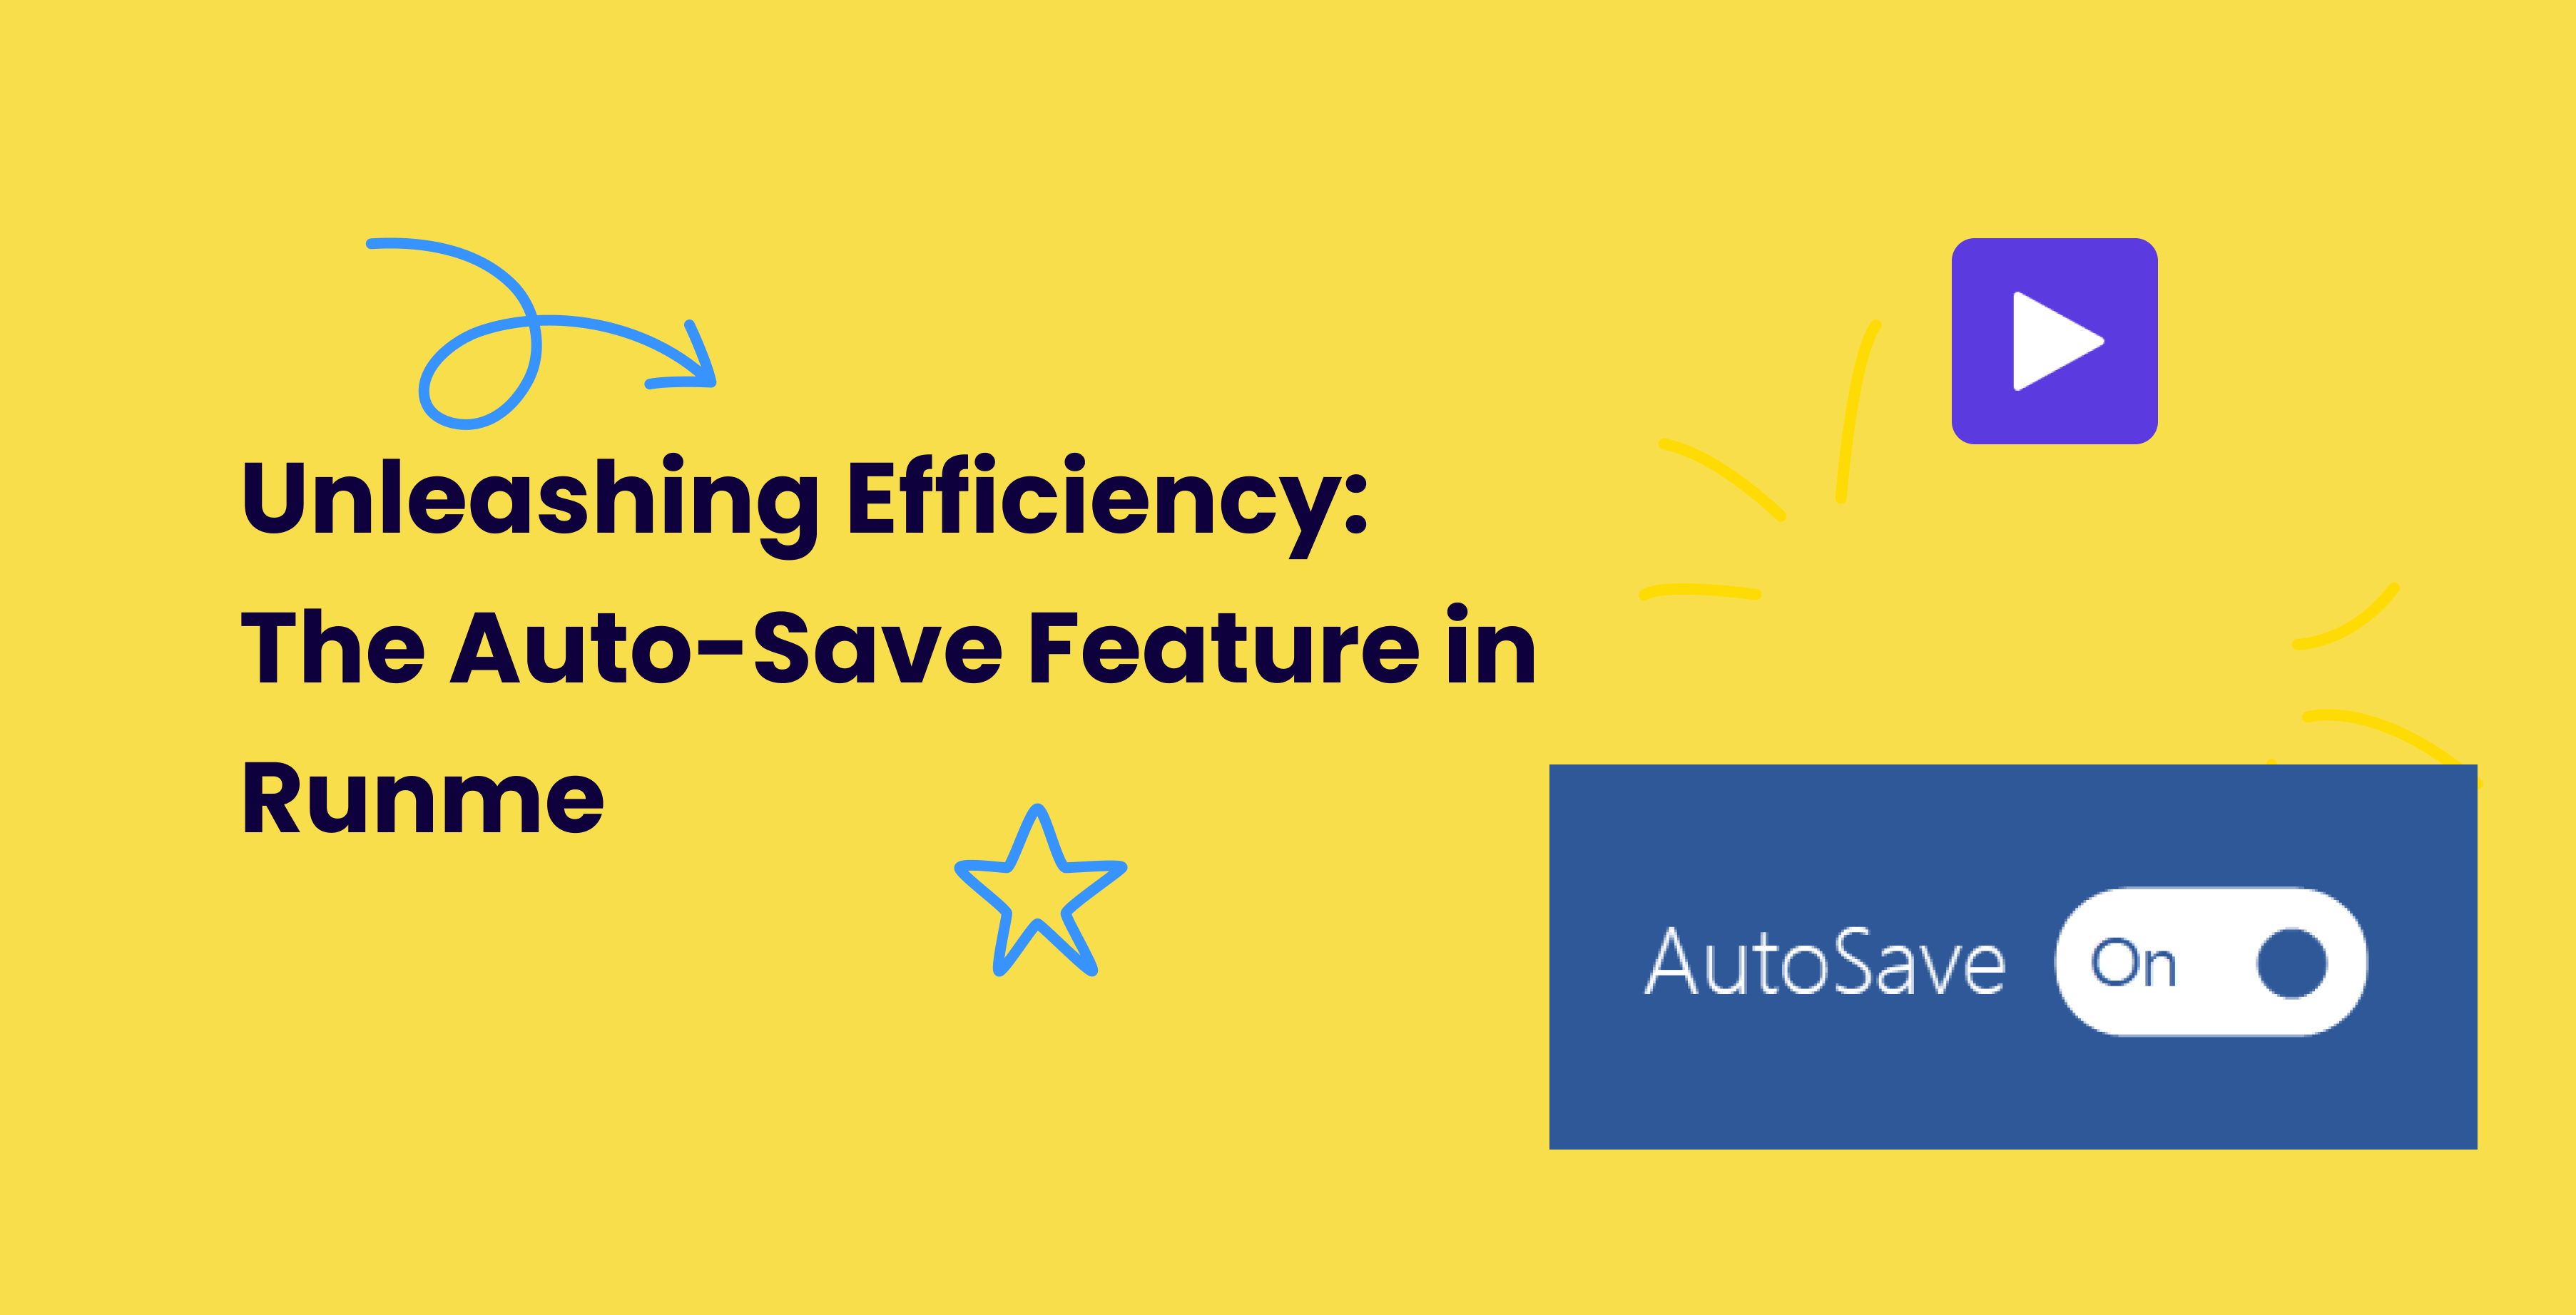 Unleashing Efficiency: The Auto-Save Feature in Runme